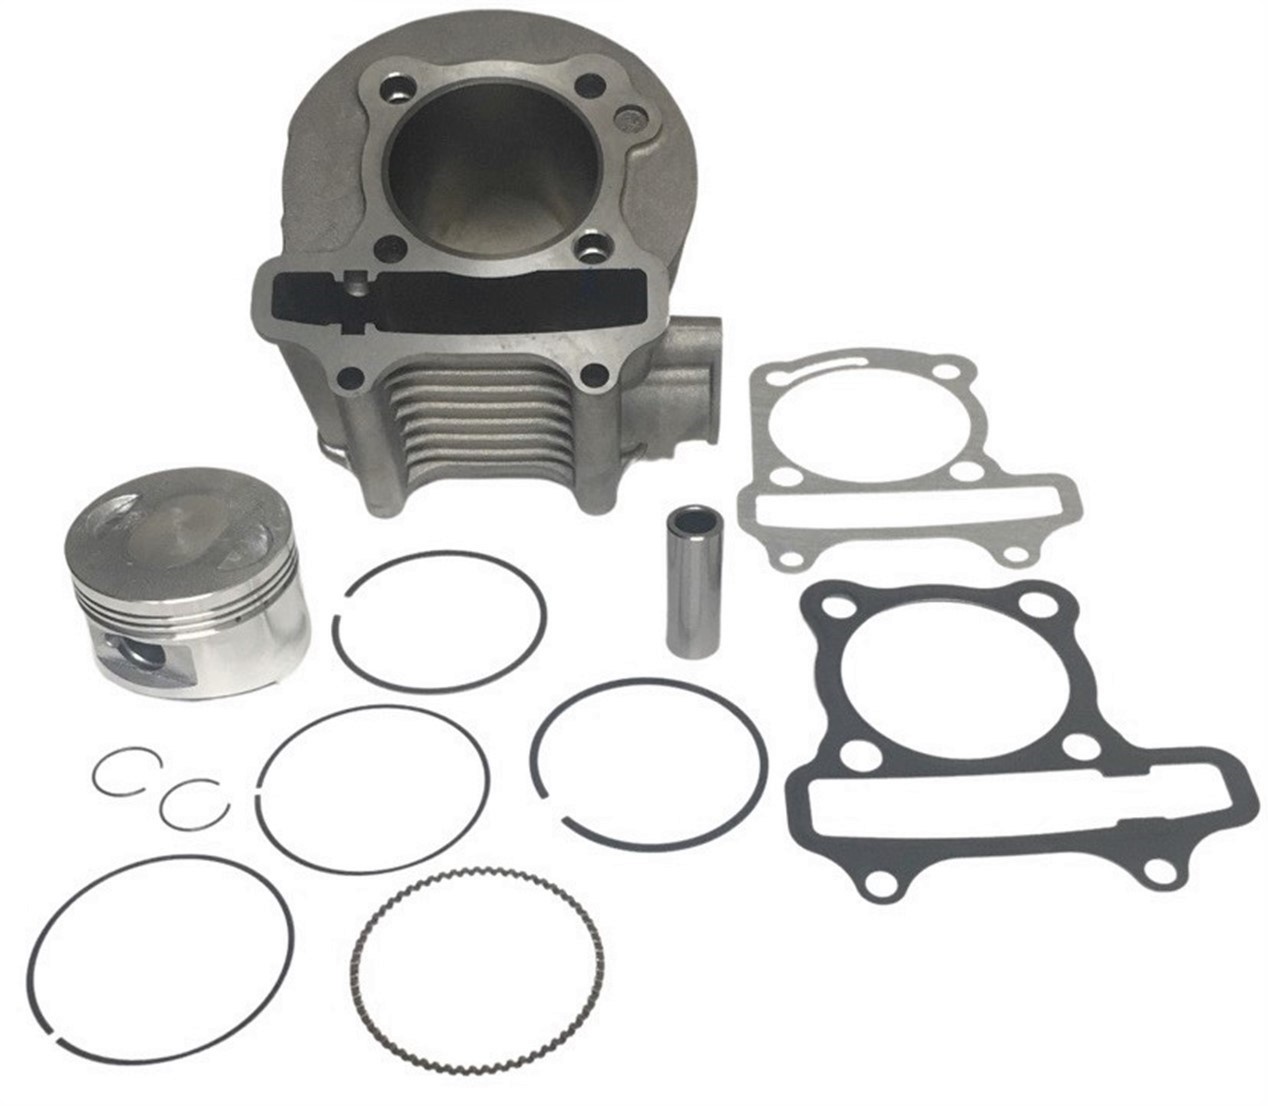 Cylinder Piston Top End Kit 125cc 4 Stroke GY6125 ATVs, GoKarts, Scooters B=52mm